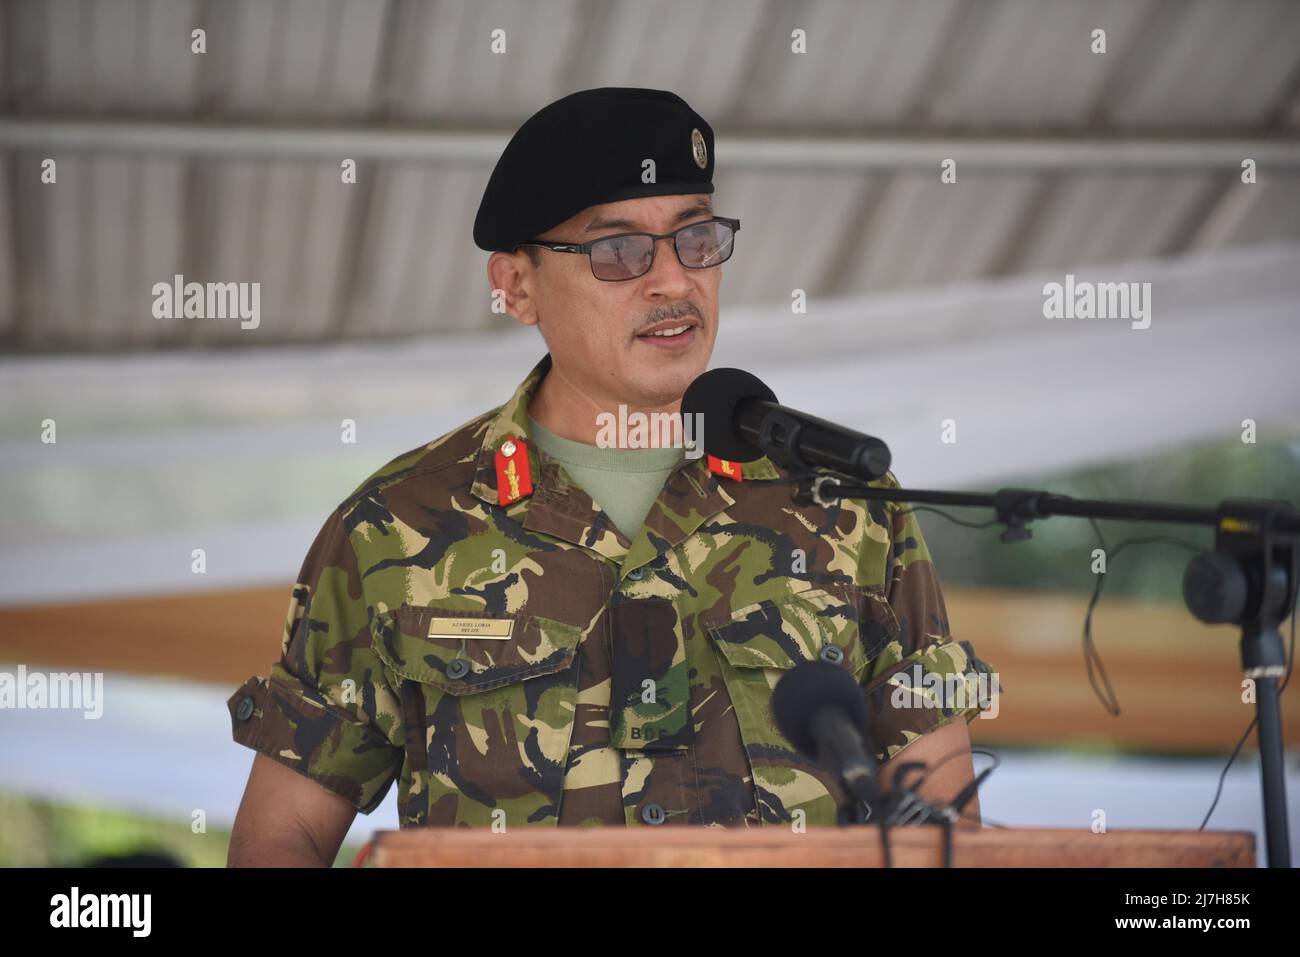 Belize City, Belize. 07 May, 2022. Commander of the Belize Defence Force, Brigadier General Asariel Loria, addresses the member nations participating in joint military Exercise Tradewinds opening ceremony, May 7, 2022 in Belize City, Belize.  Credit: PO3 Ryan Noe/U.S. Coast Guard/Alamy Live News Stock Photo